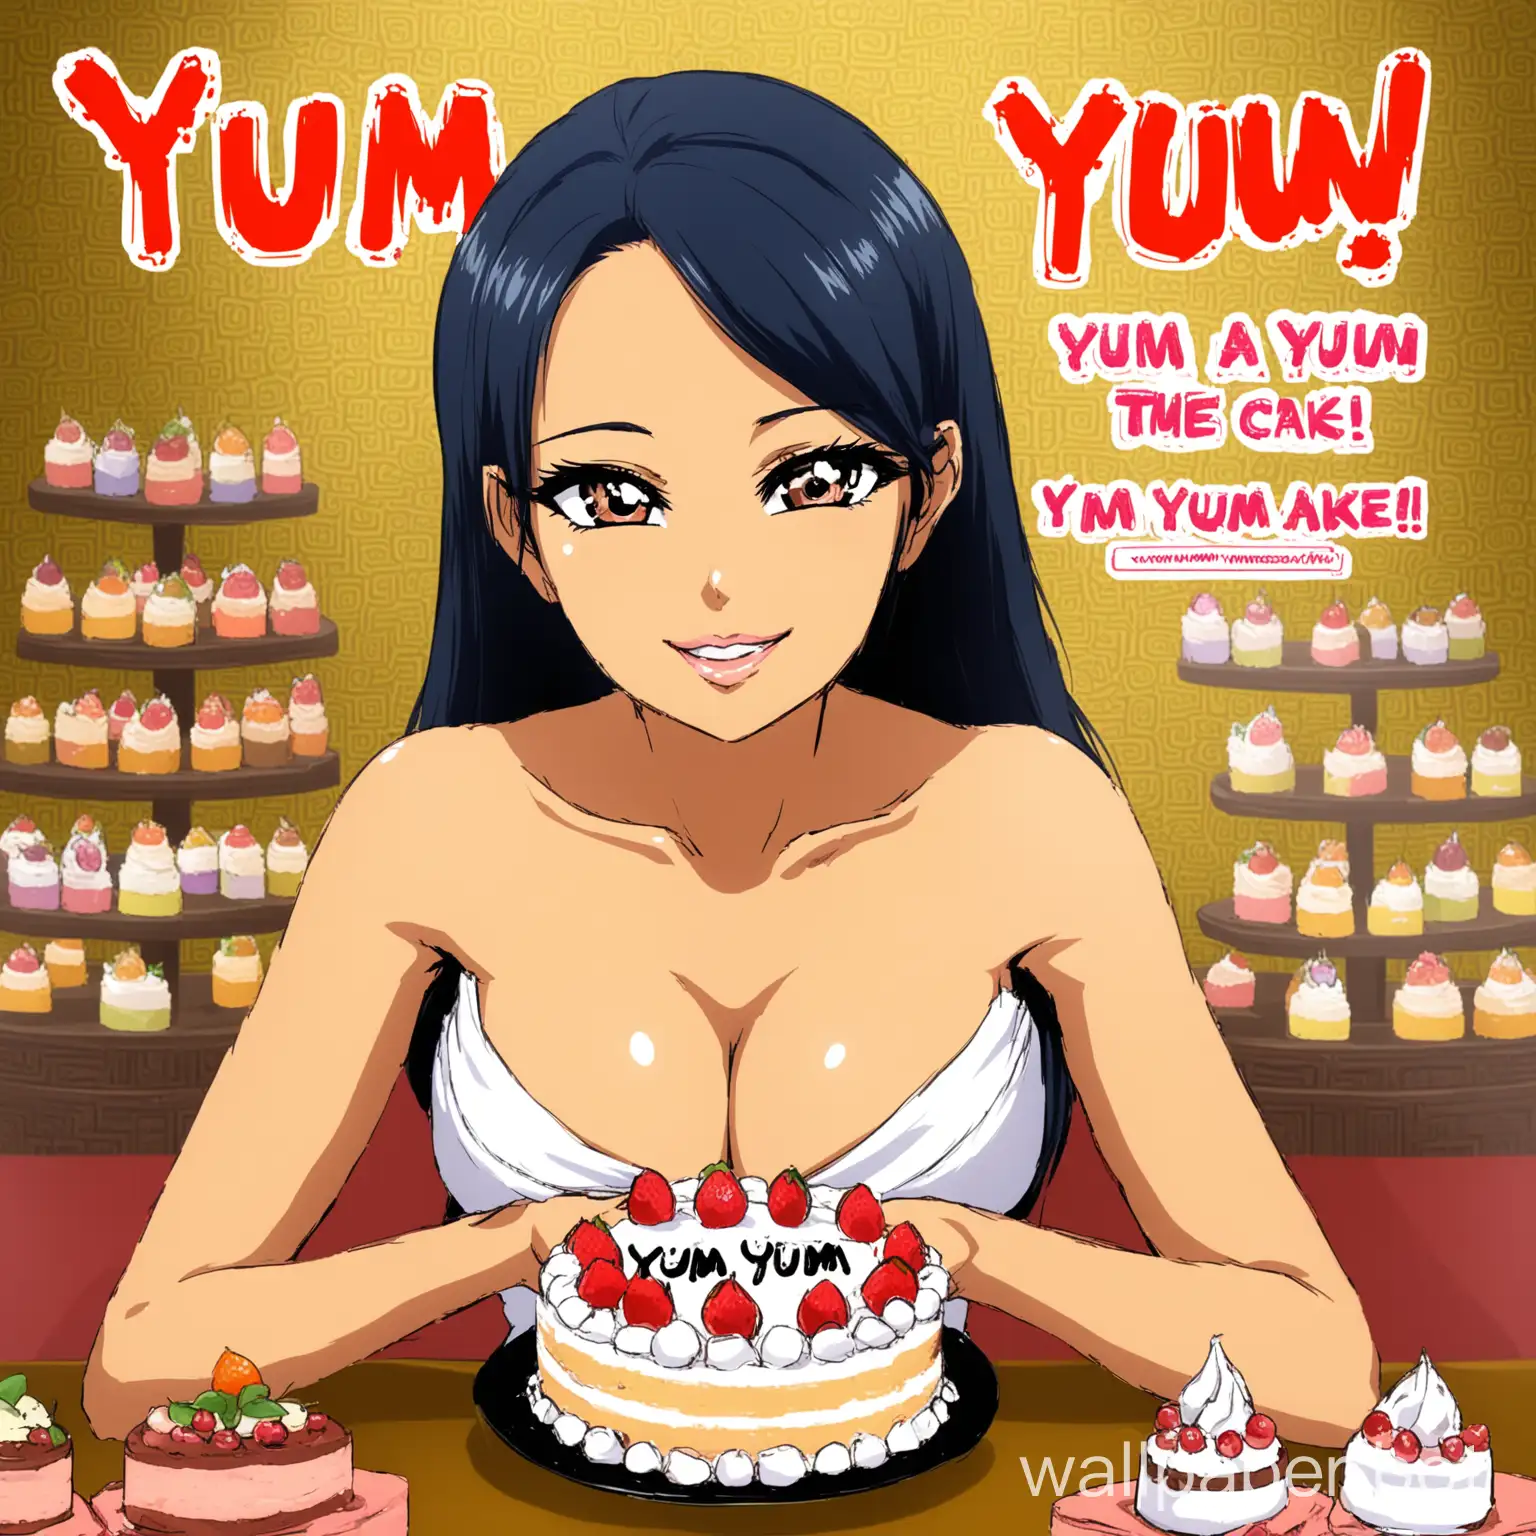 cambodian massage woman with cake in anime. visible cleavage. with text yum yum at the background.